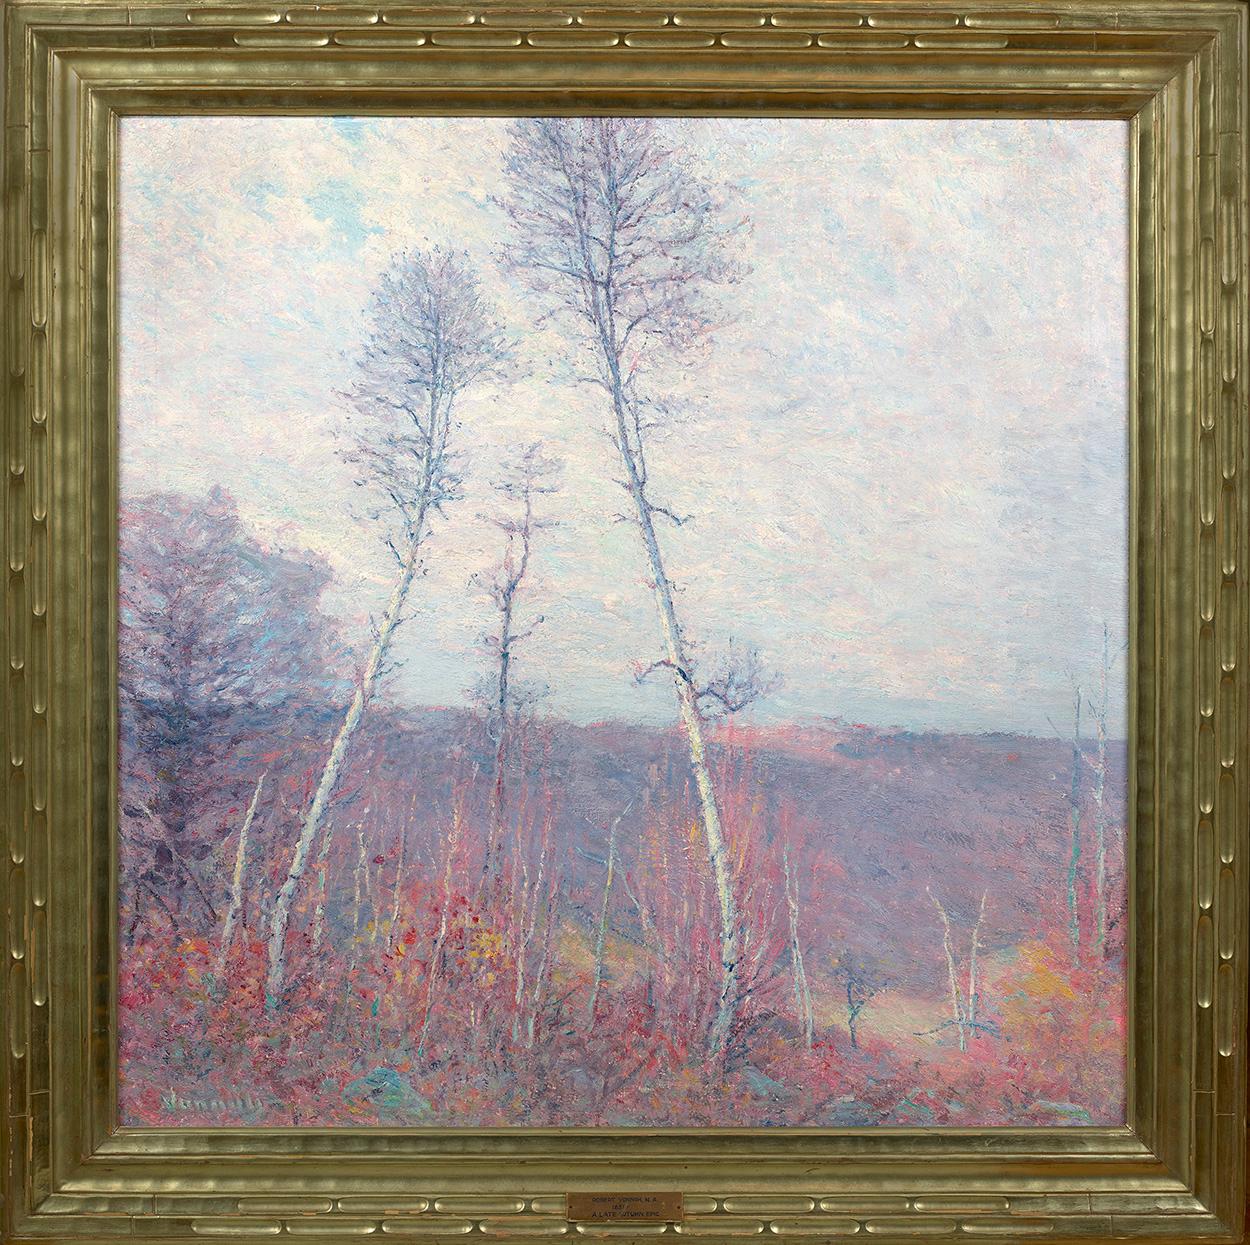 A Late Autumn Epic - Painting by Robert William Vonnoh